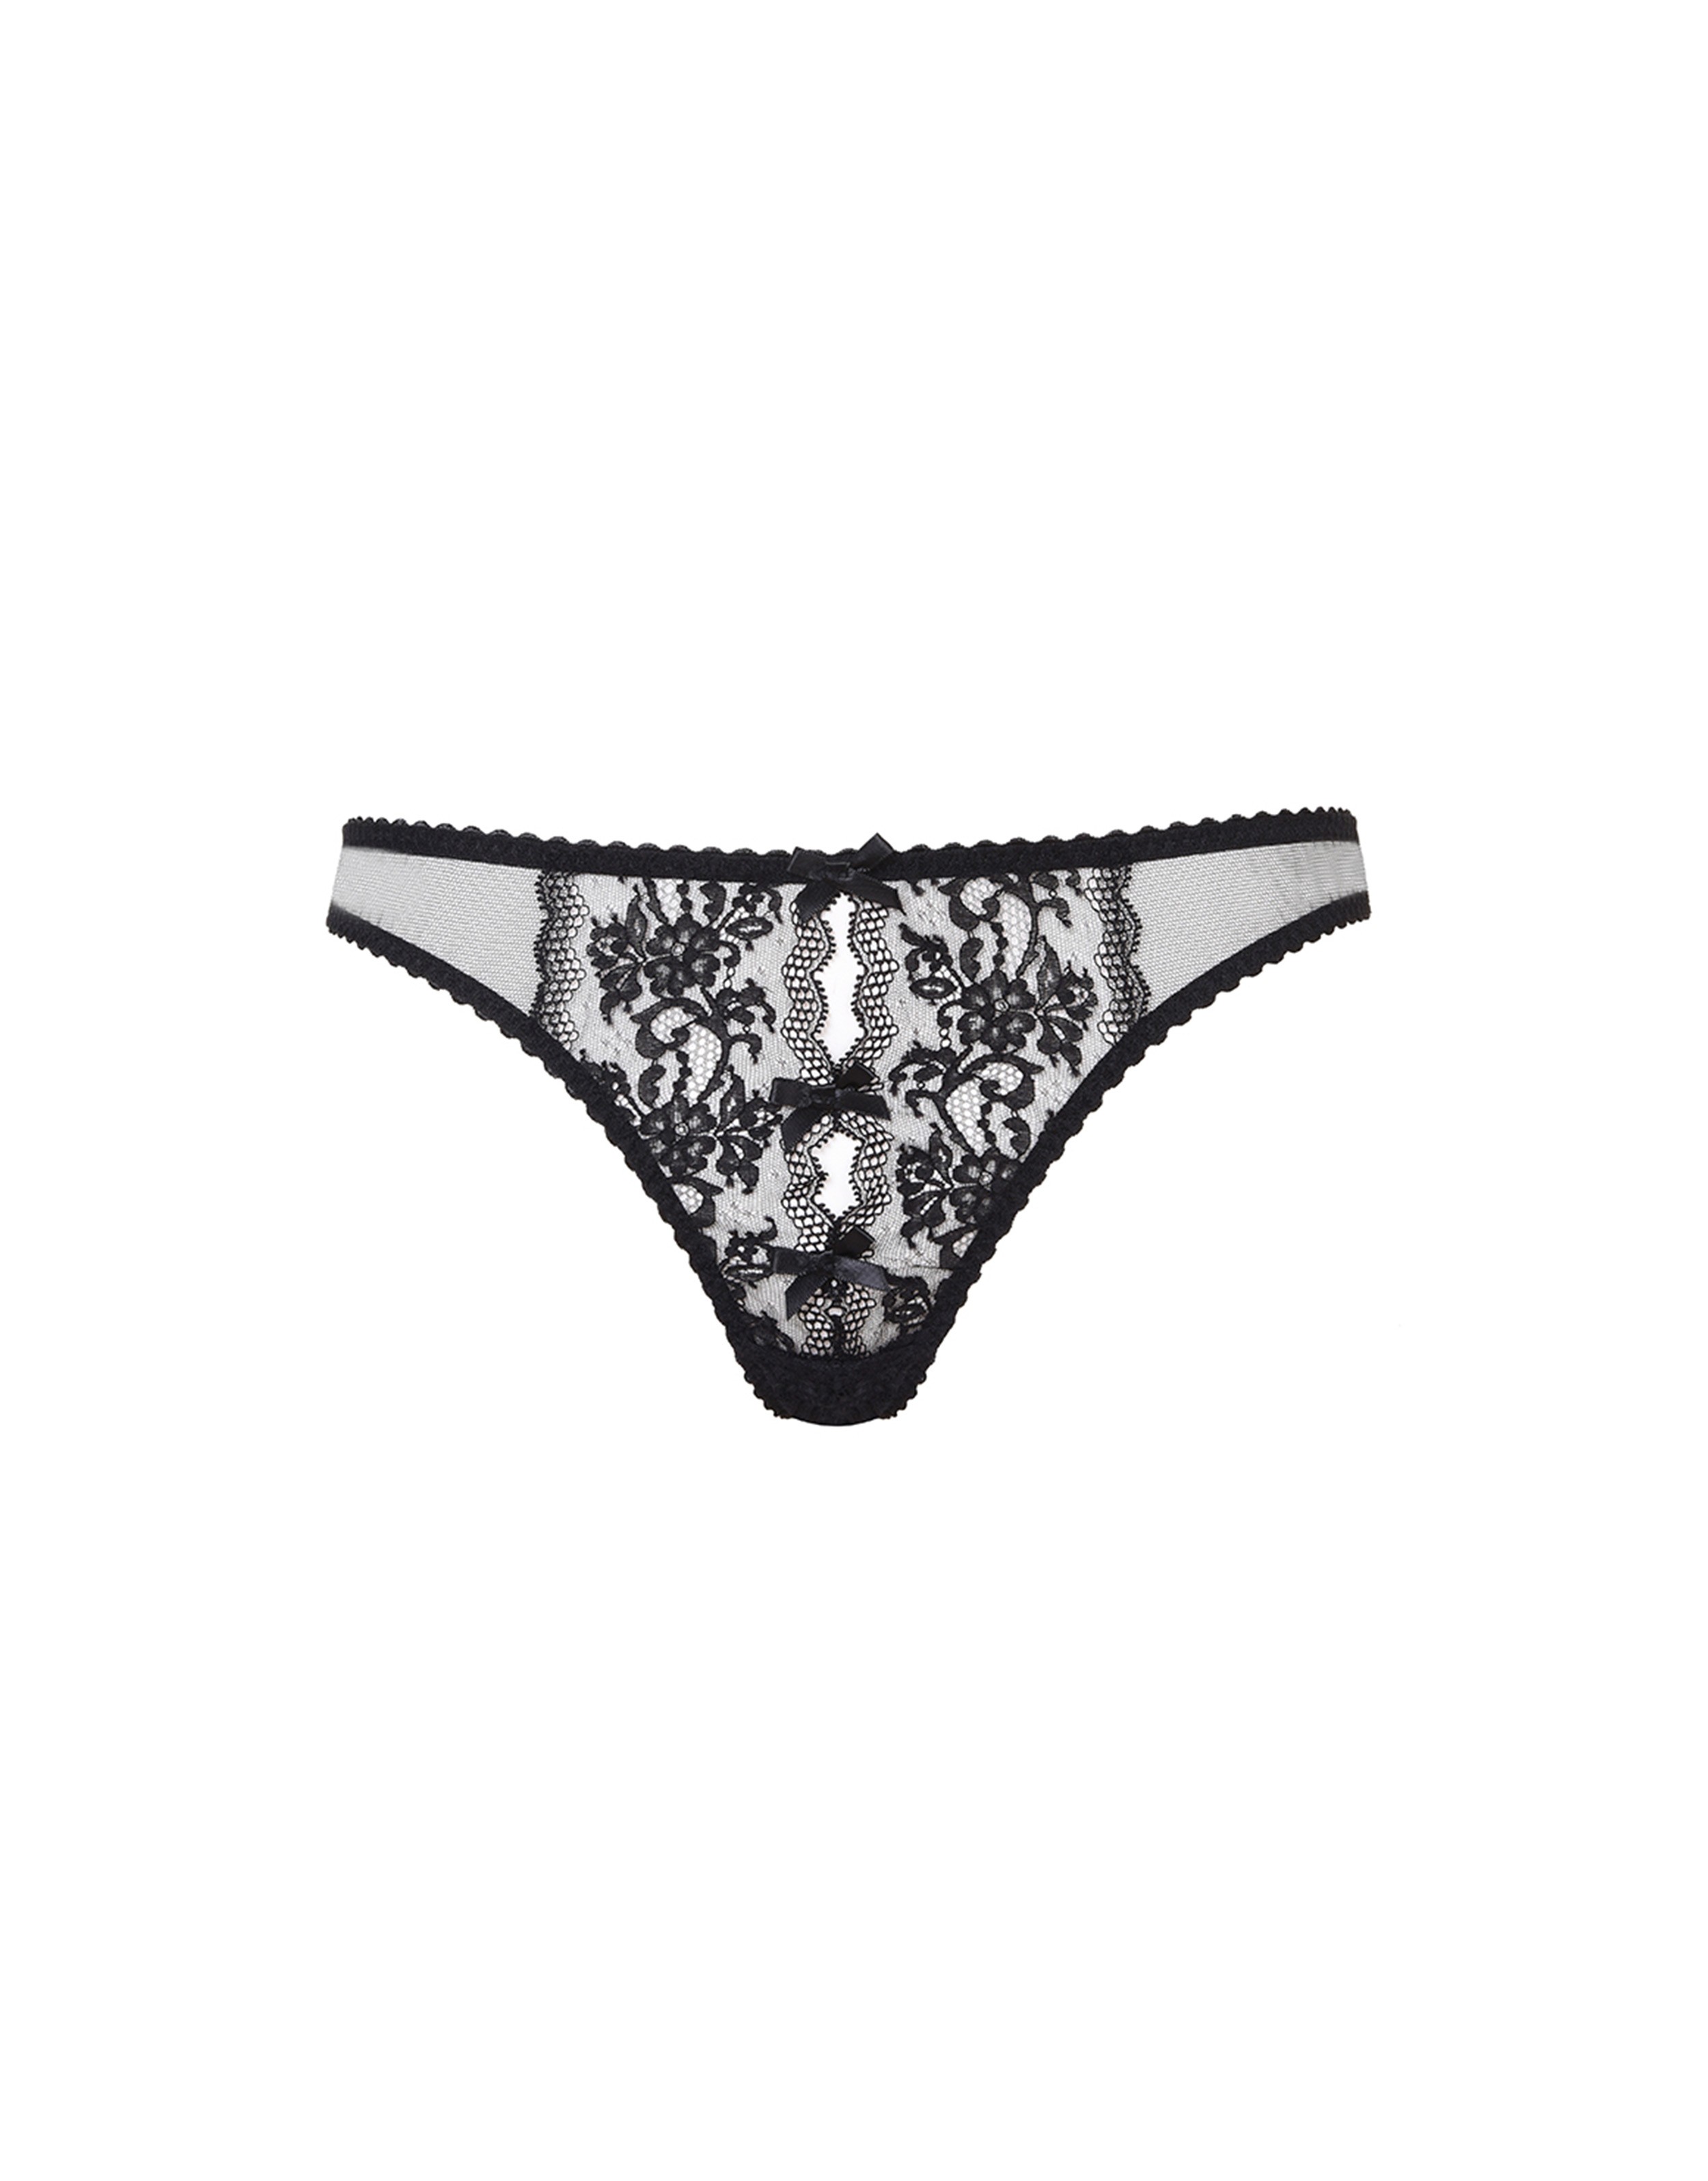 Tamico Ouvert in Black | Agent Provocateur Outlet